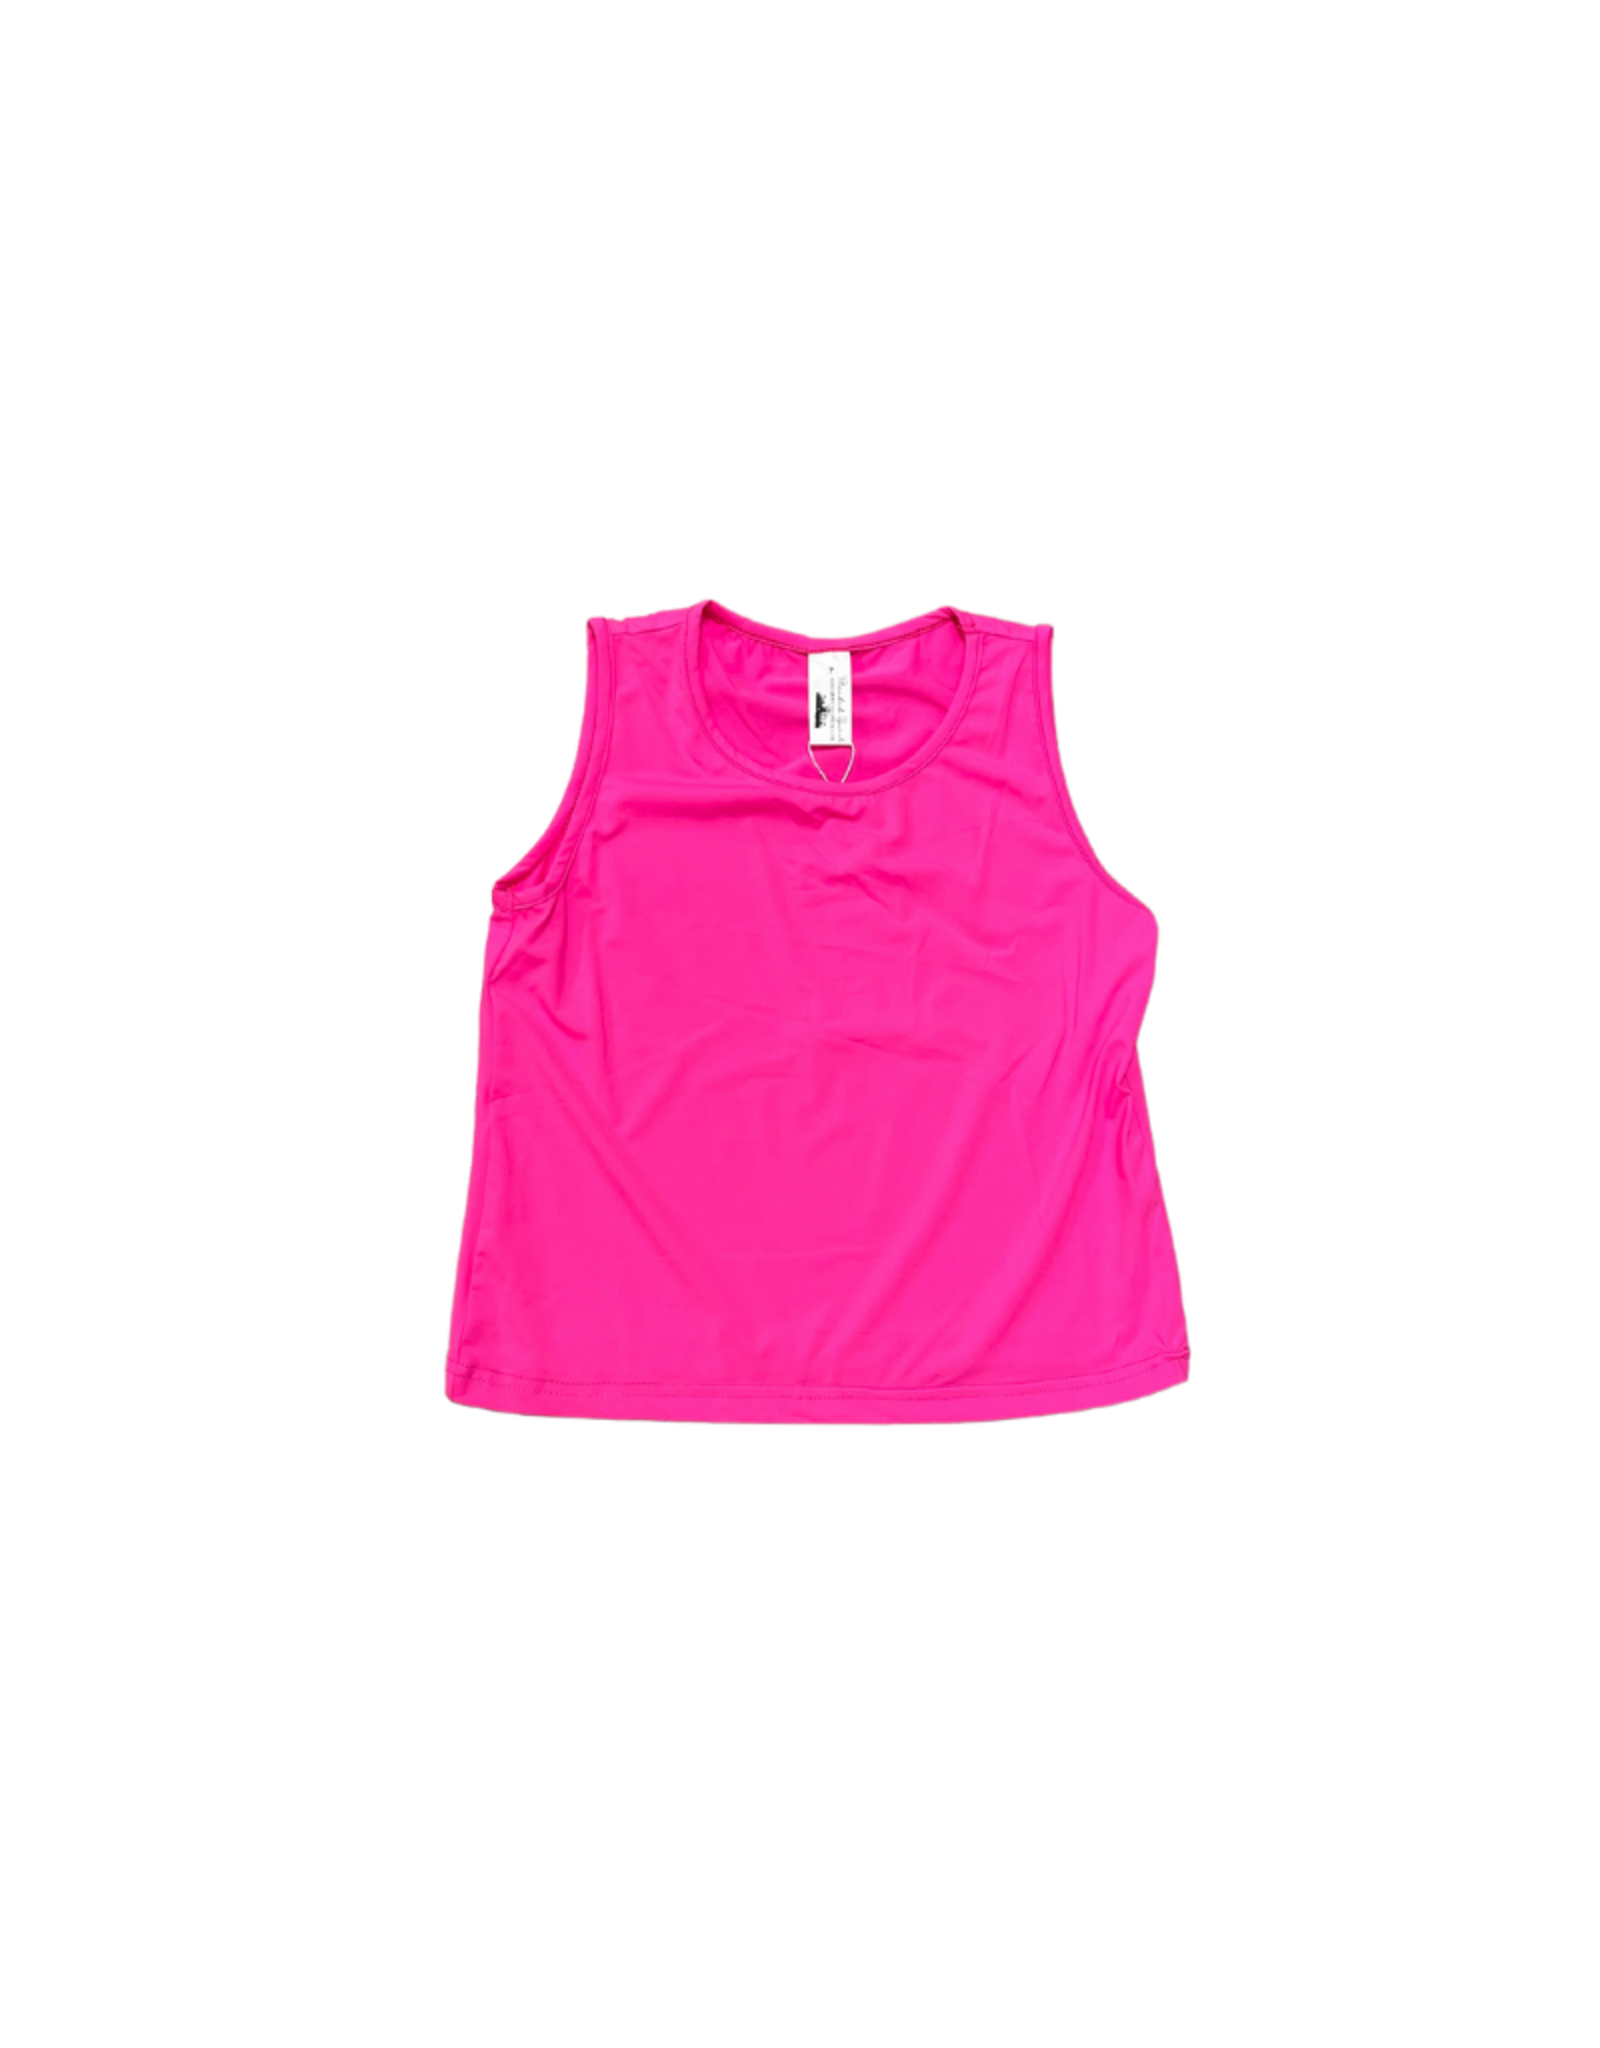 Hot Pink Athletic Top